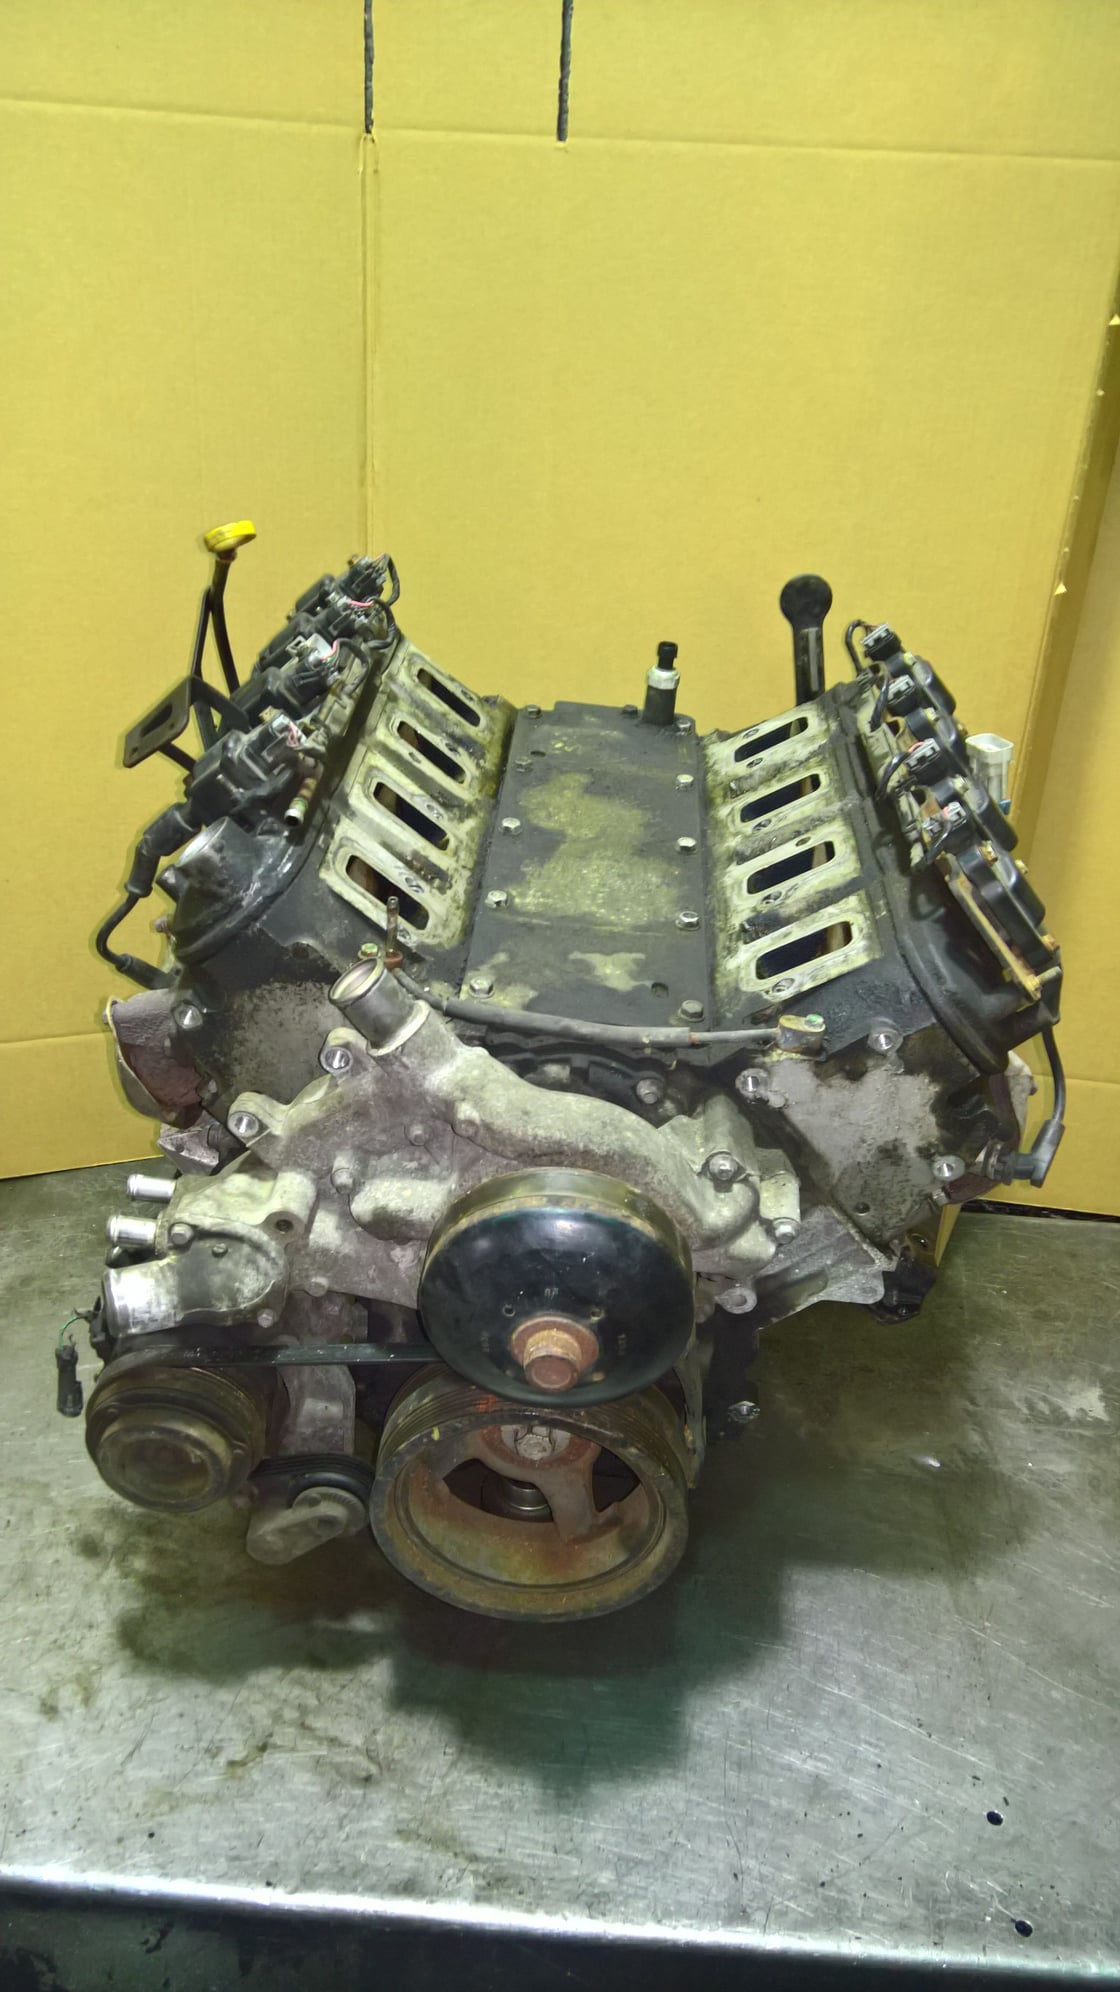 Engine - Complete - 6.2 ls3 / l92 long block *** good rebuildable core *** - Used - 0  All Models - Detroit, MI 48228, United States